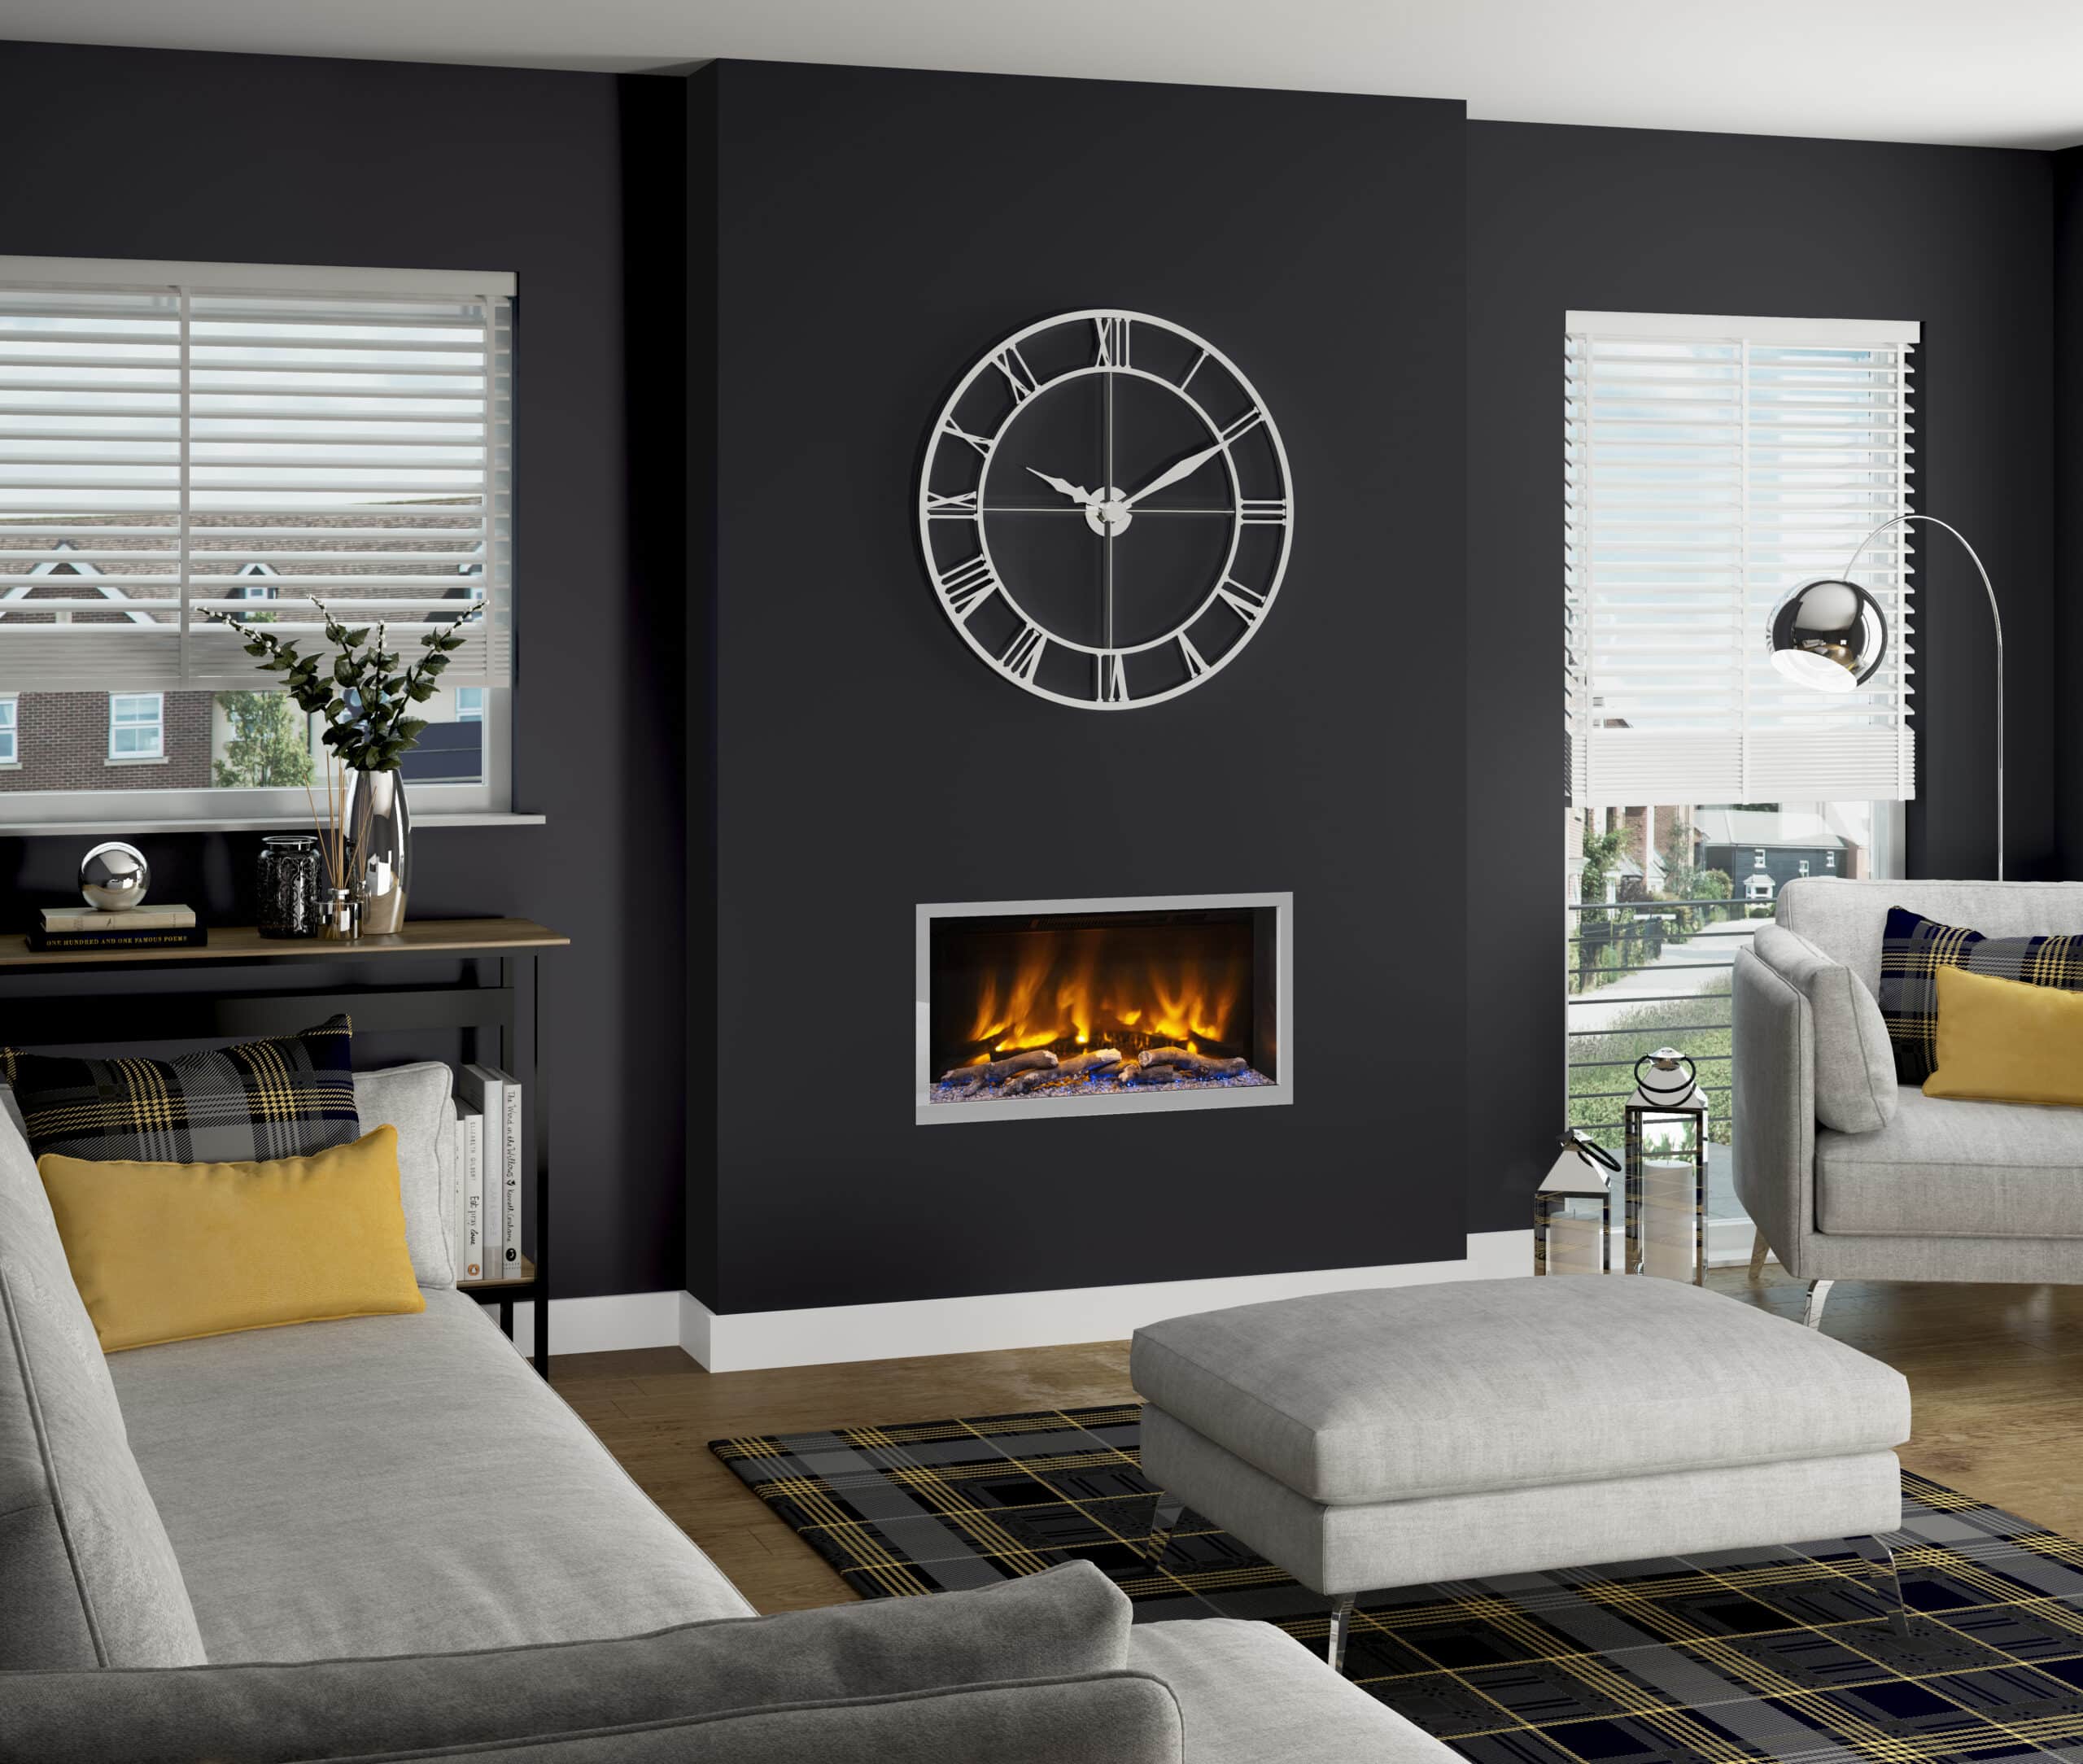 Delamere 750 - Chrome fireplace